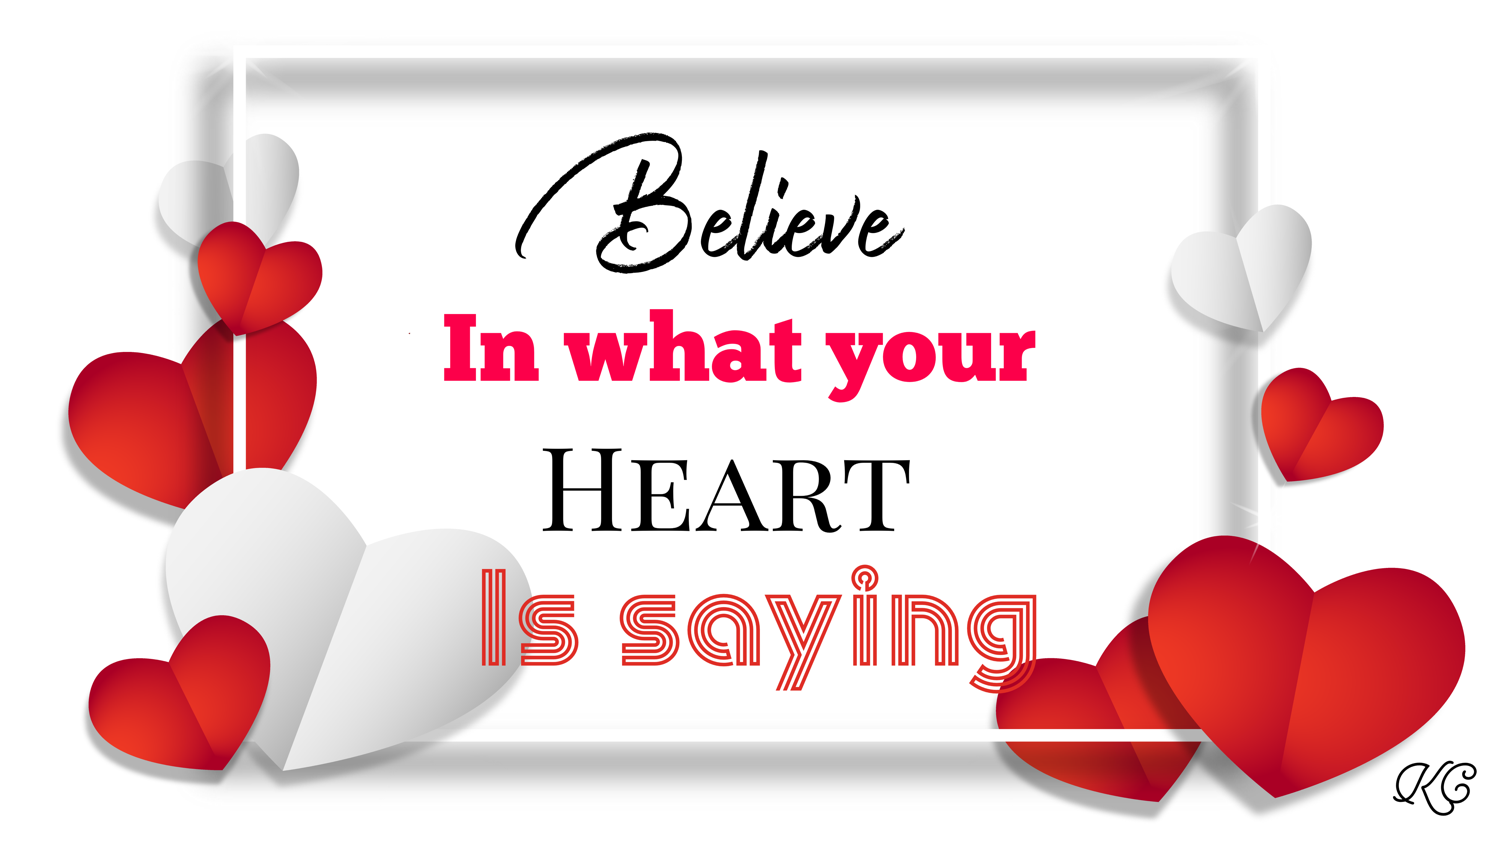 Kembri: Believe in what your heart is saying